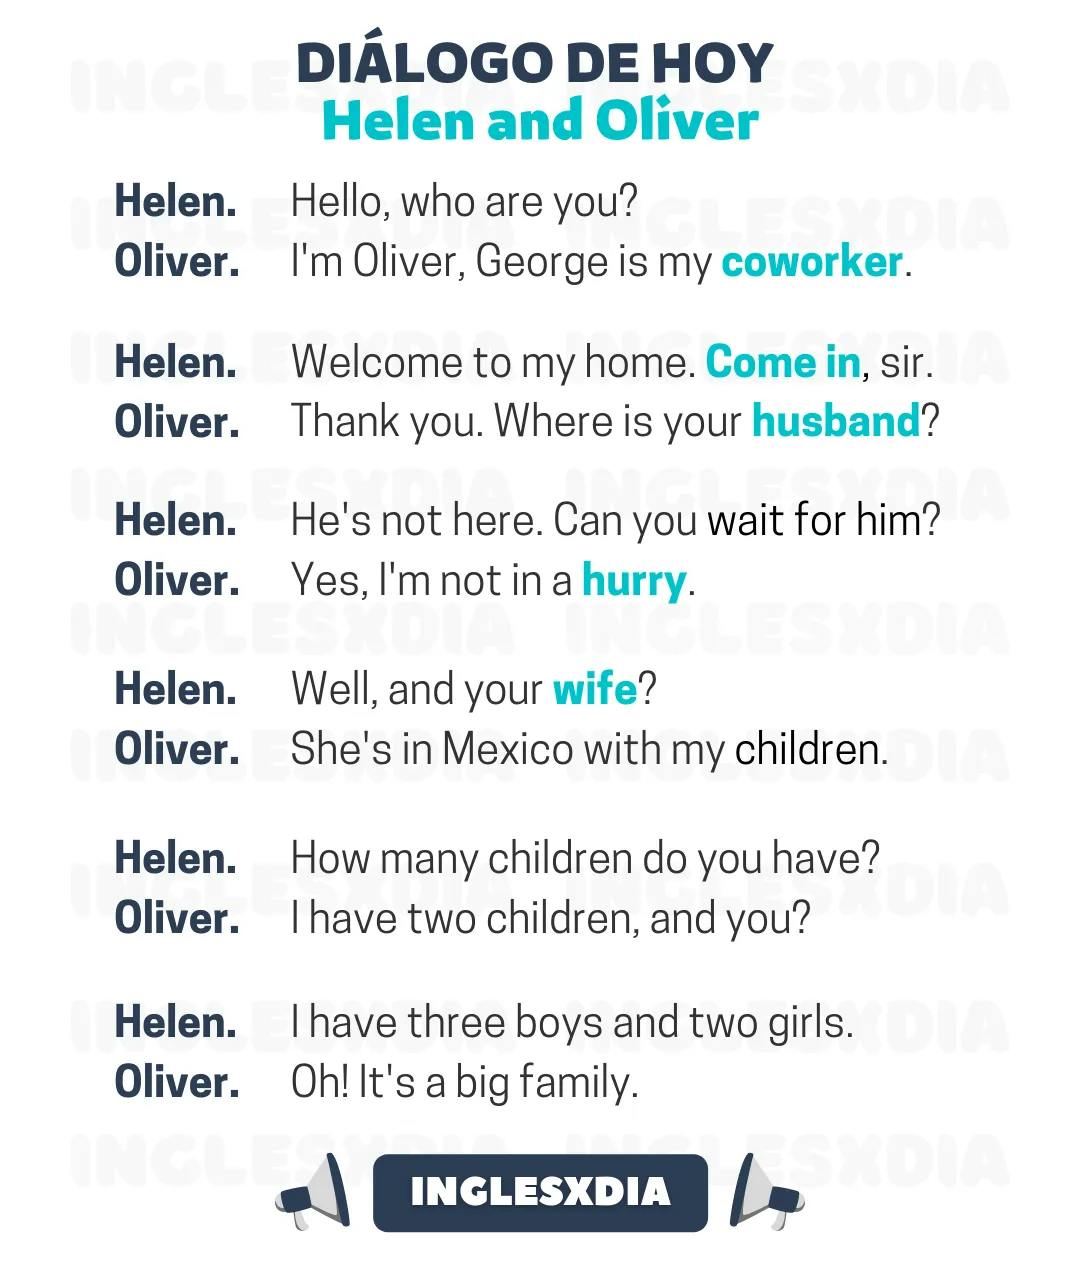 Helen and Oliver